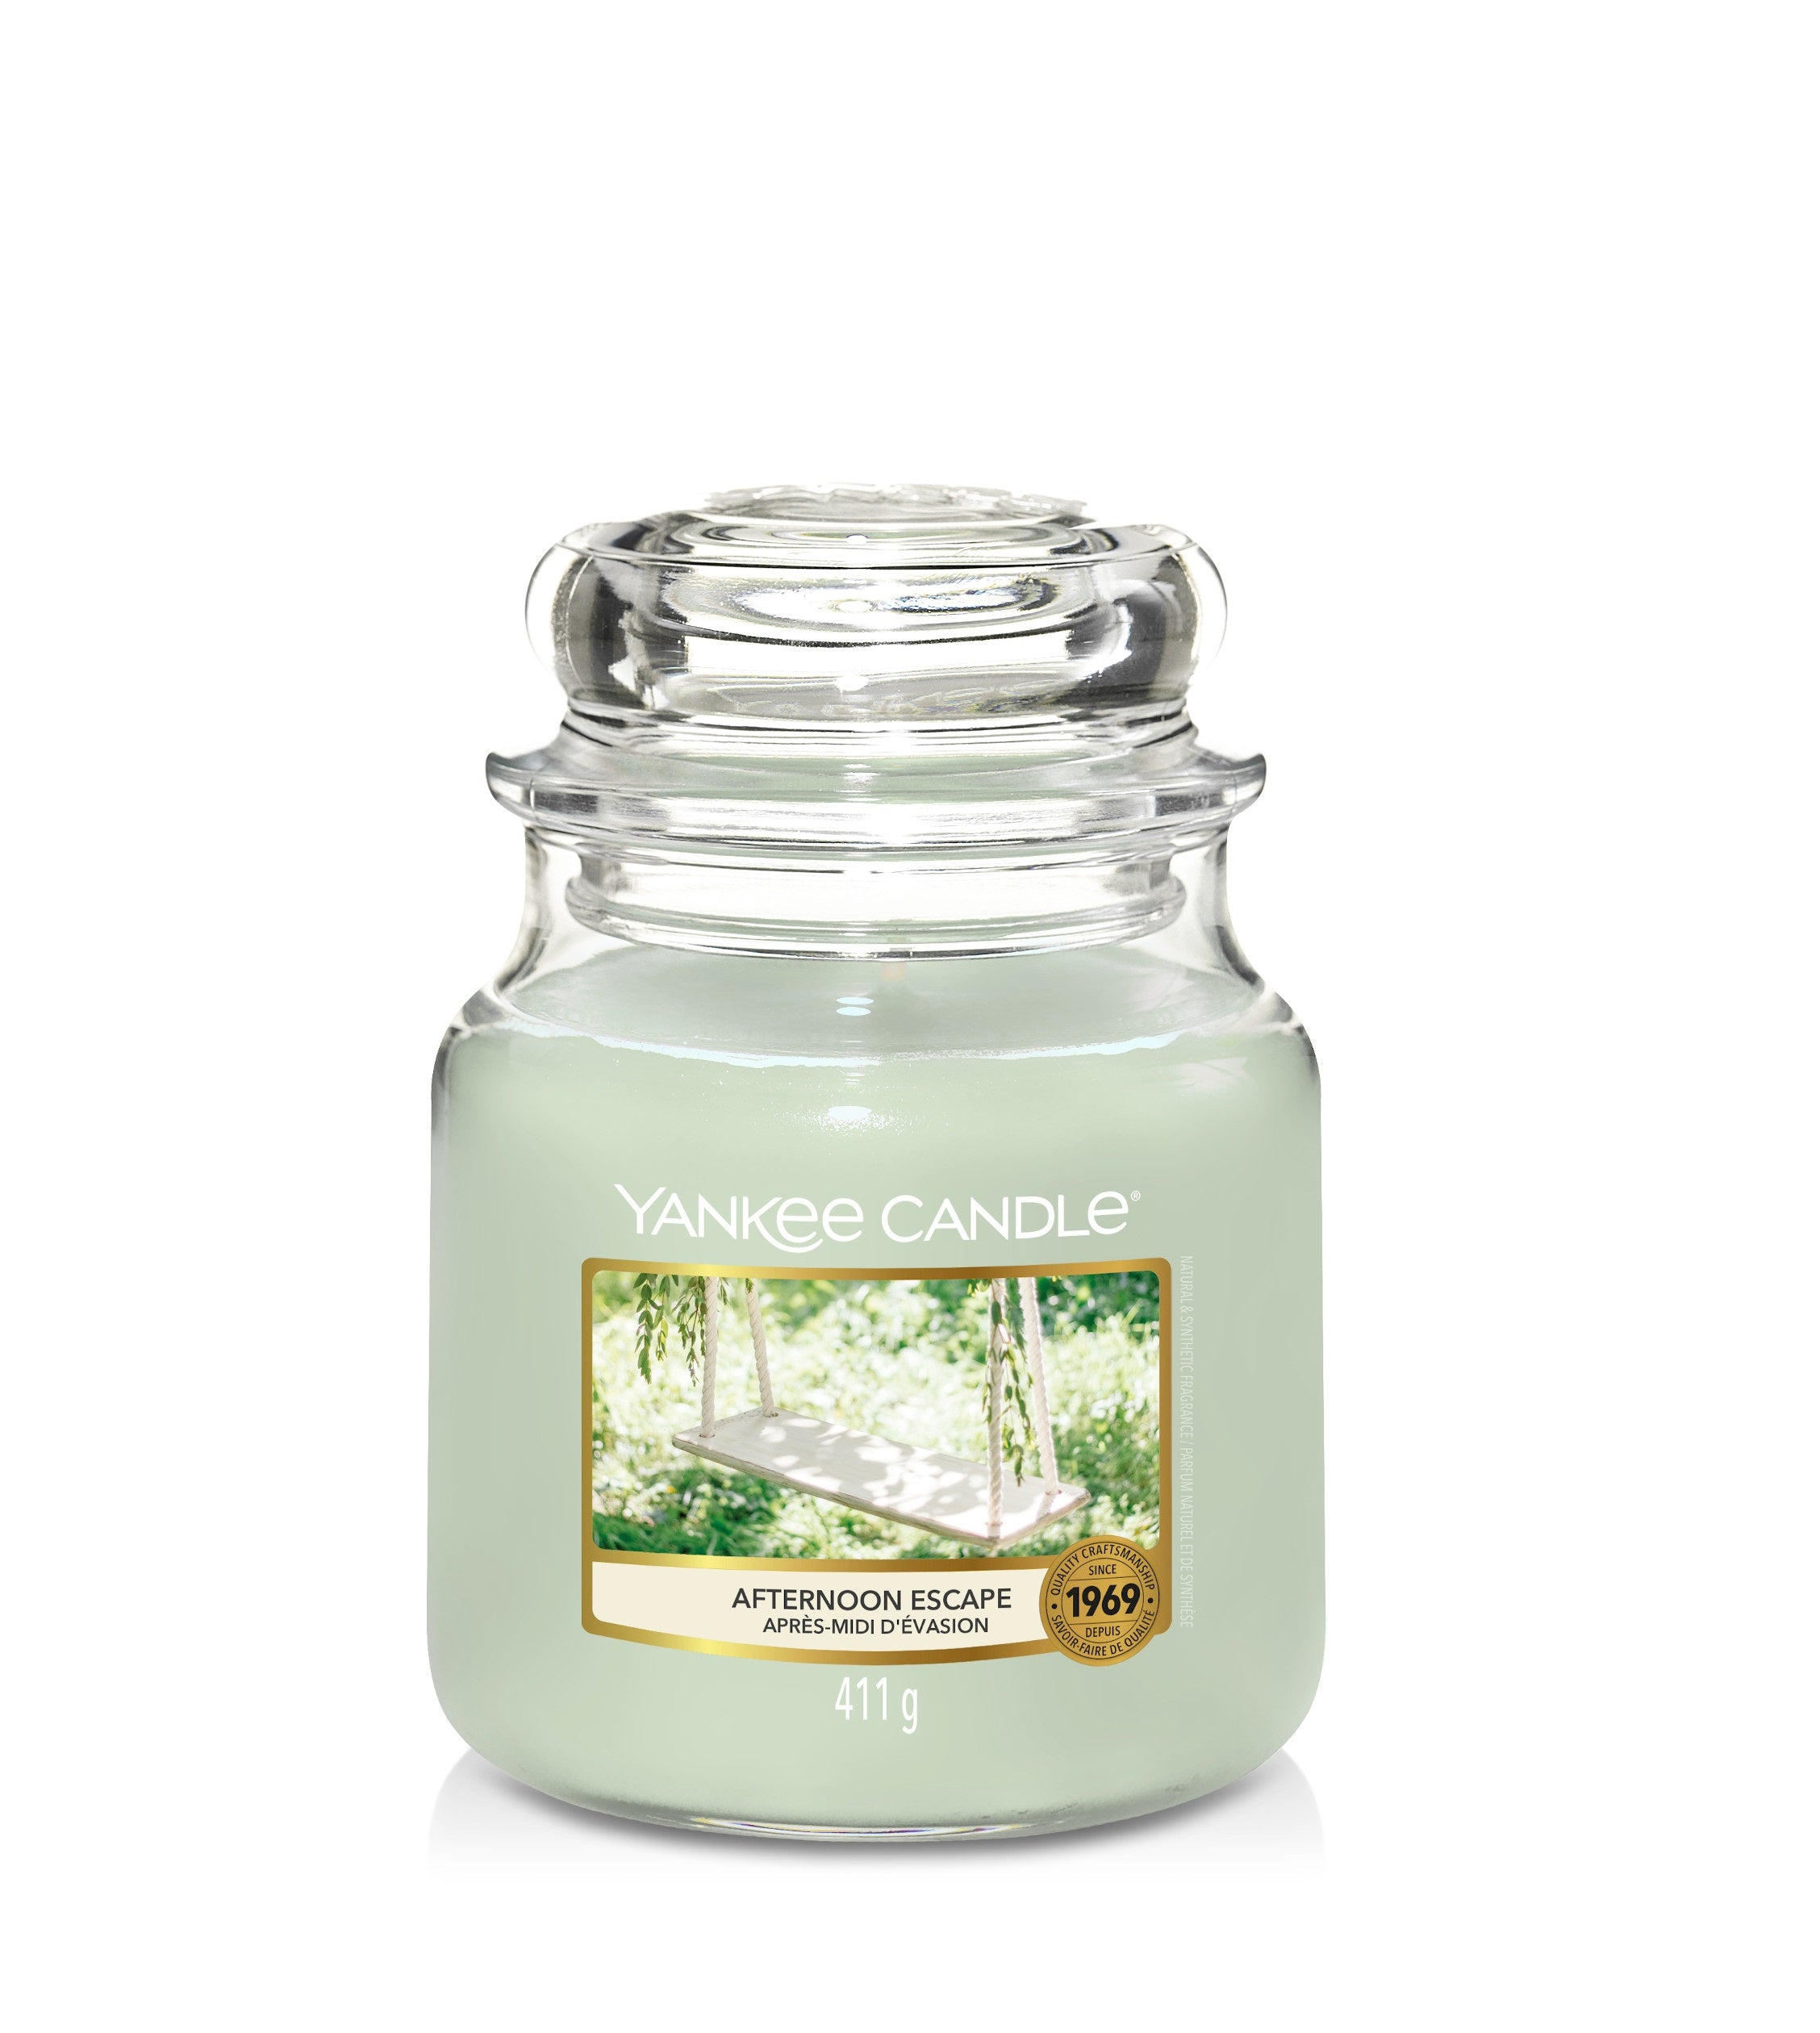 AFTERNOON ESCAPE -Yankee Candle- Giara Media